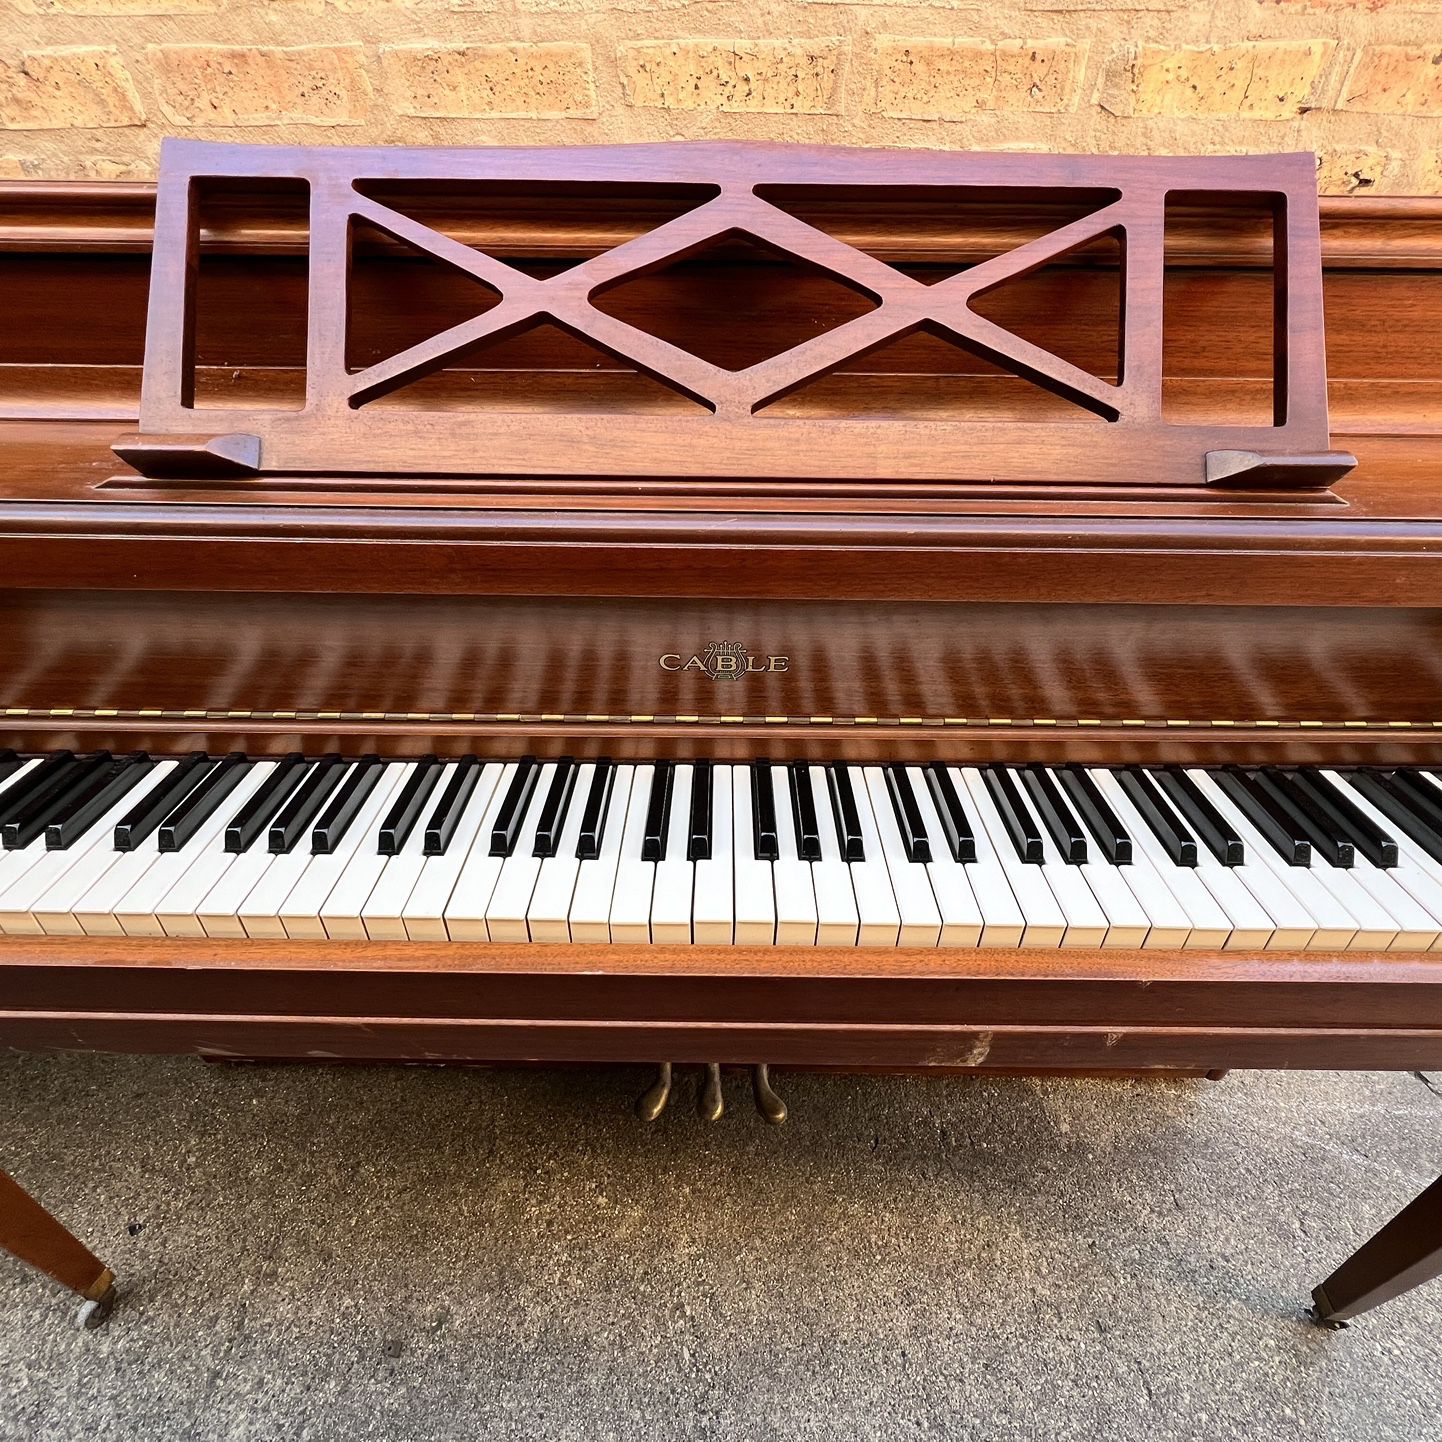 CABLE CHICAGO UPRIGHT PIANO - OFFERS IMMEDIATE PICKUP!